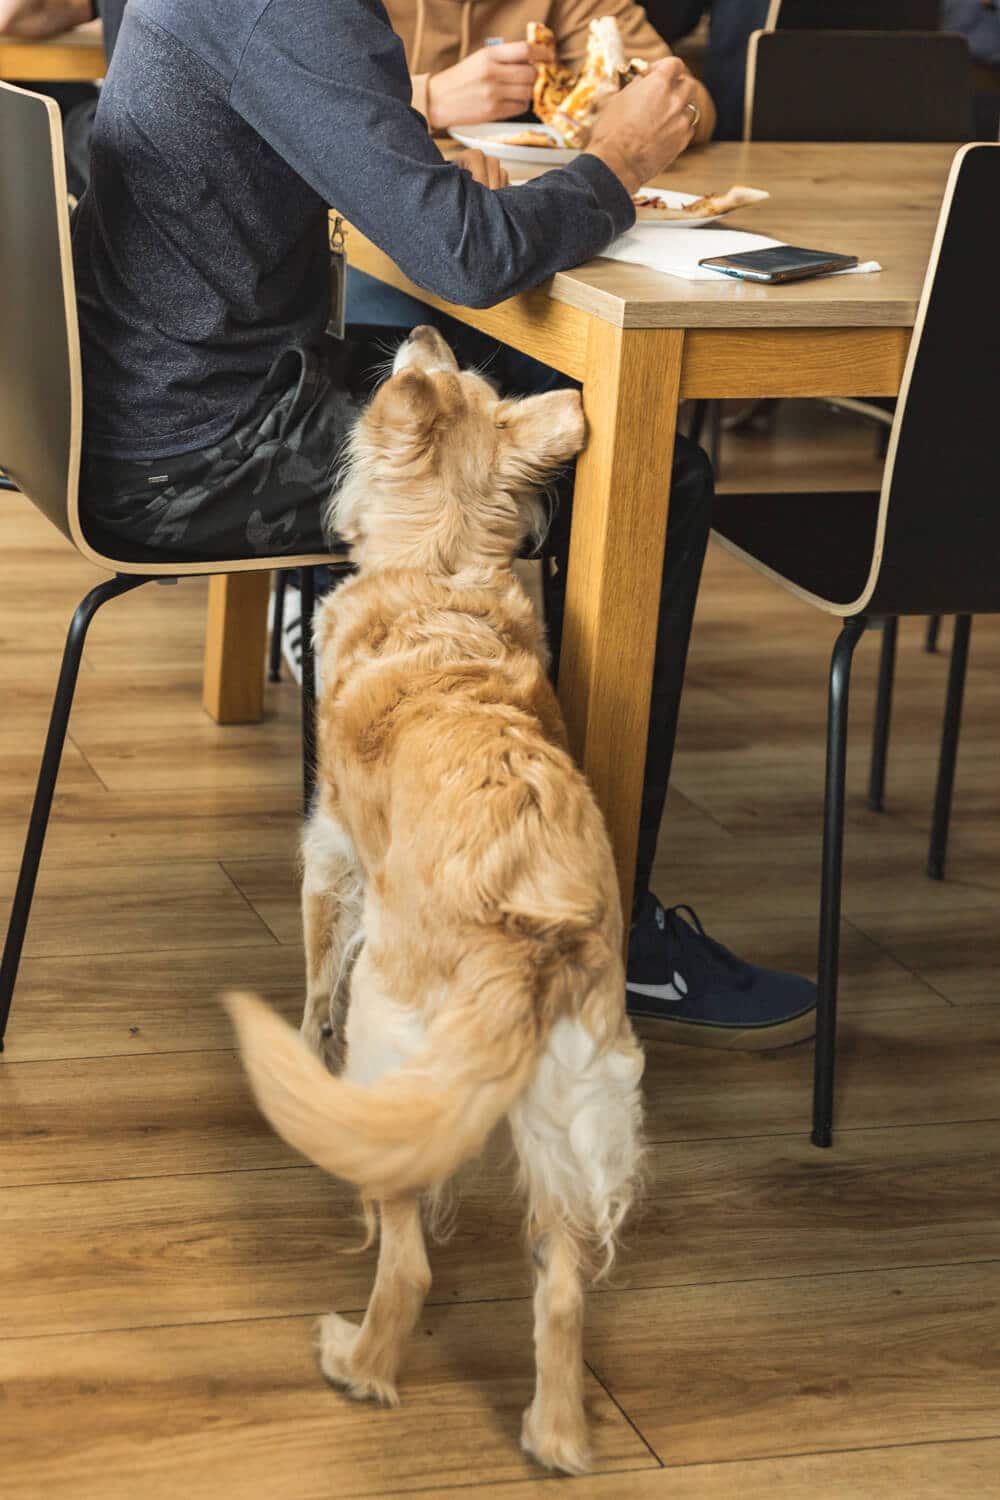 a dog looking at a person sat at a table